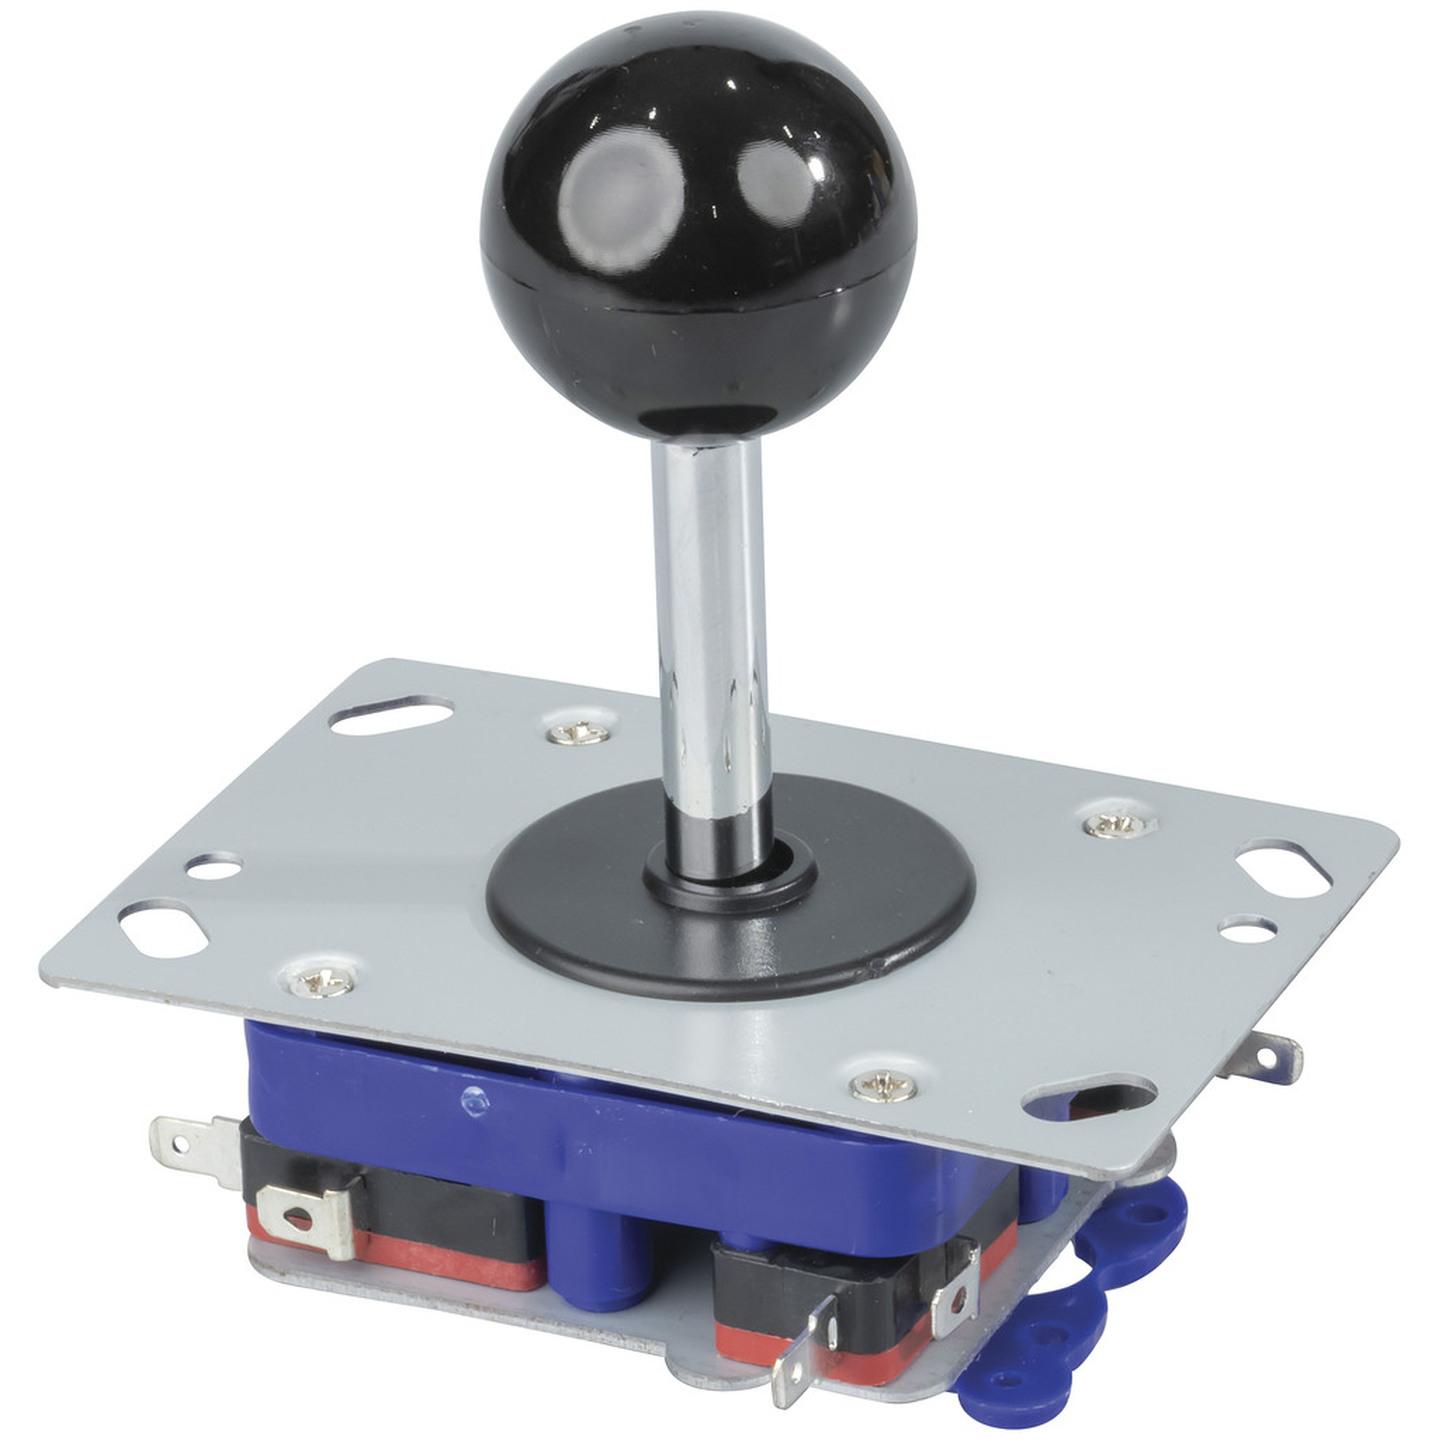 Arcade Joystick with Microswitches